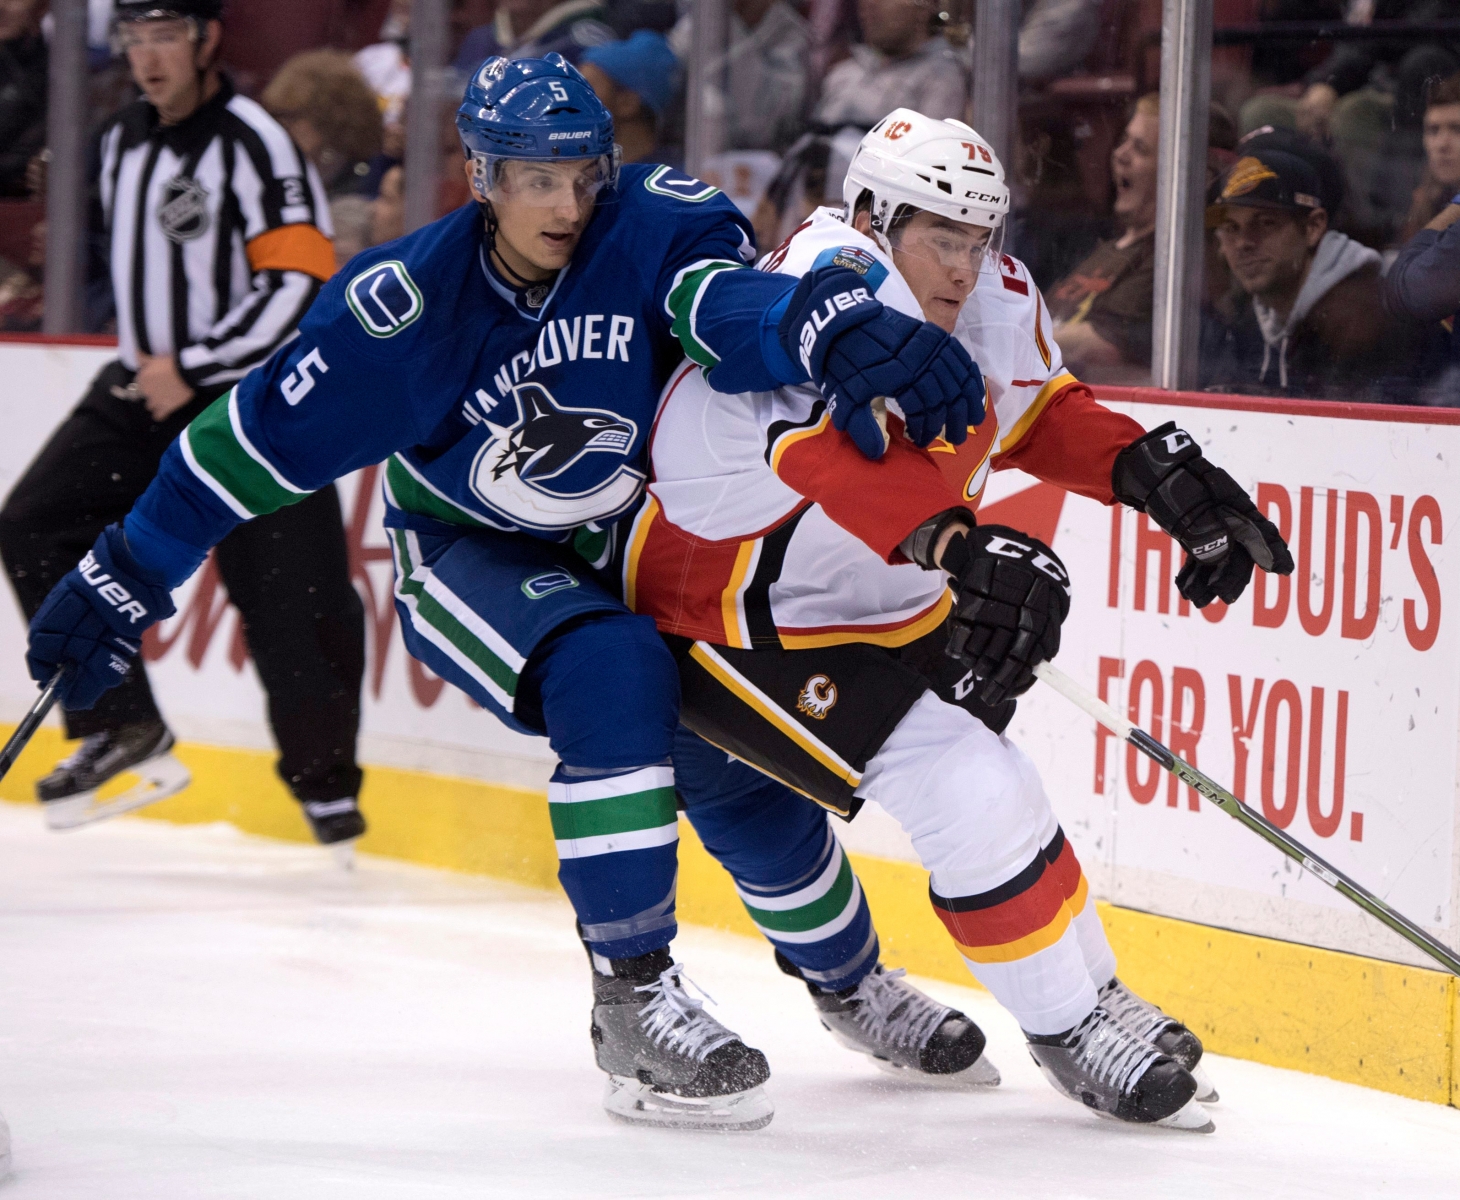 Vancouver Canucks defenseman Luca Sbisa (5) fights for control of the puck with Calgary Flames left wing Micheal Ferland (79) during the first period of an NHL hockey game in Vancouver on Saturday, Oct. 15, 2016. (Jonathan Hayward/The Canadian Press via AP) Flames Canucks Hockey